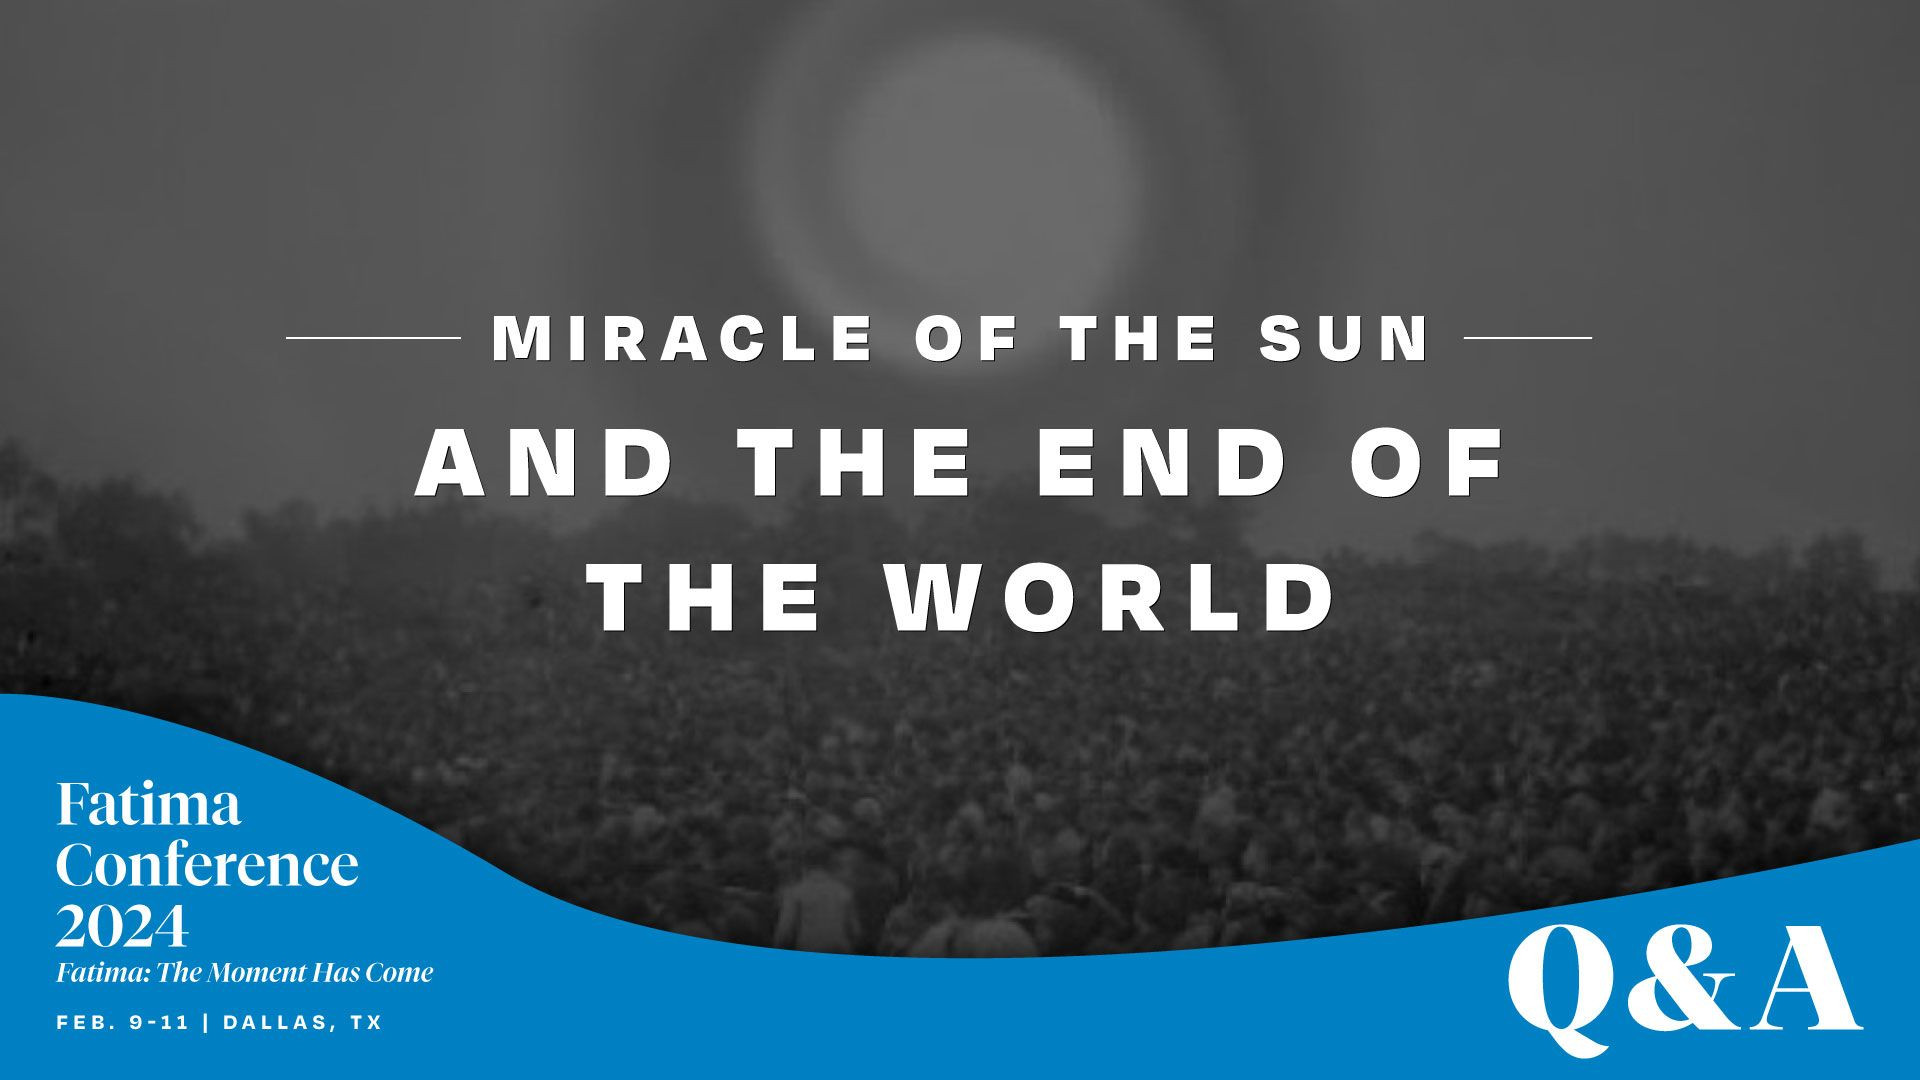 ⁣The Miracle of the Sun parallels the End of the World